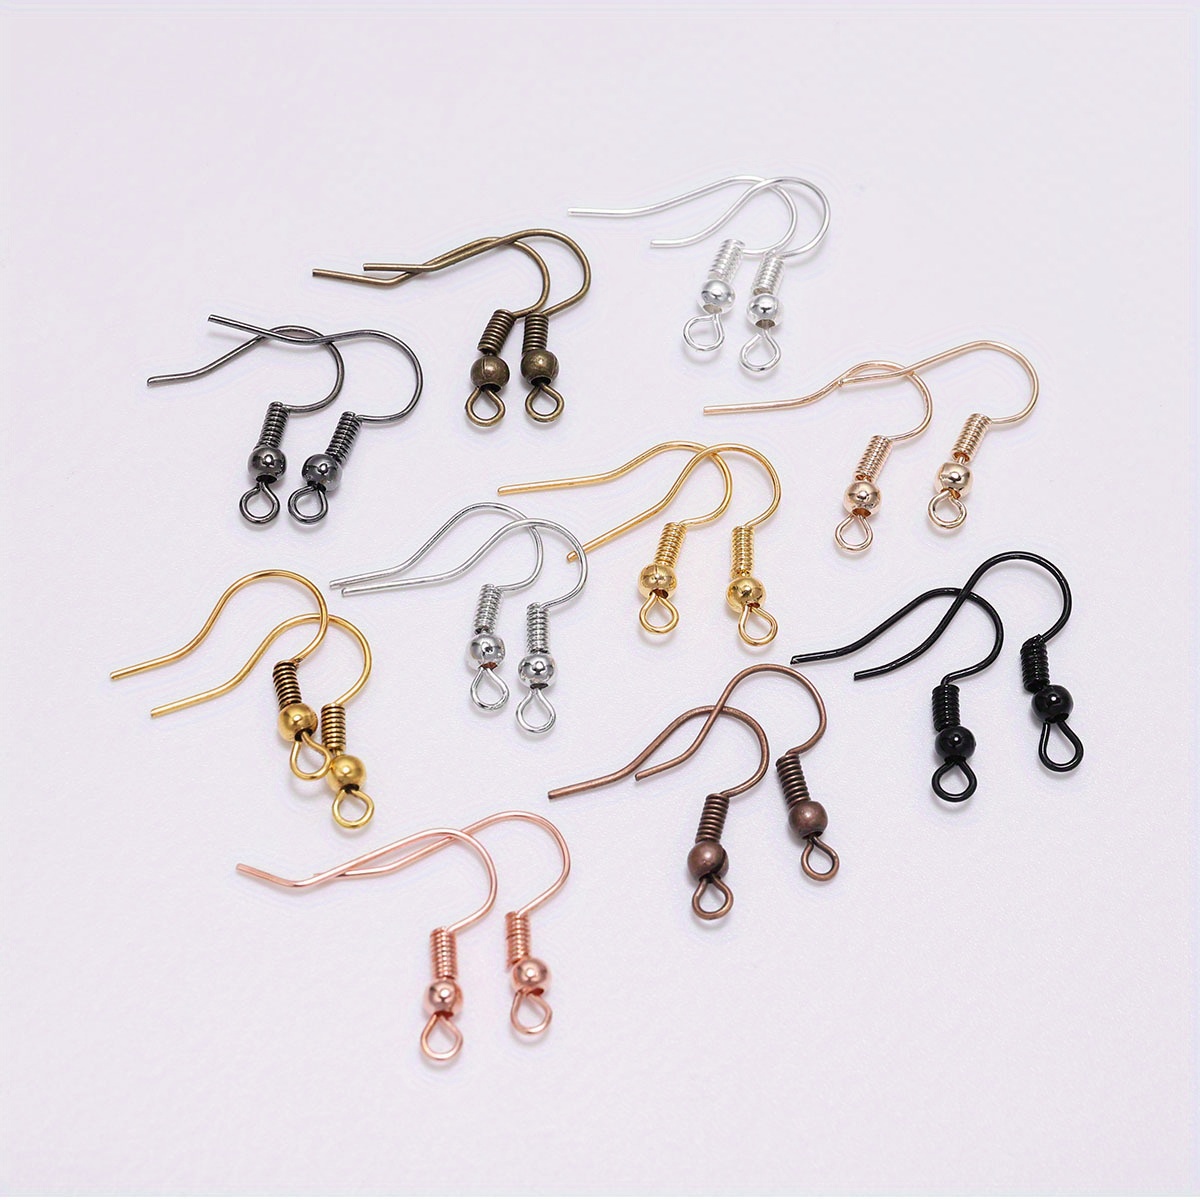 100pcs Gold Silver Mix Color Ear Hook Earring Clasps Earring Wires